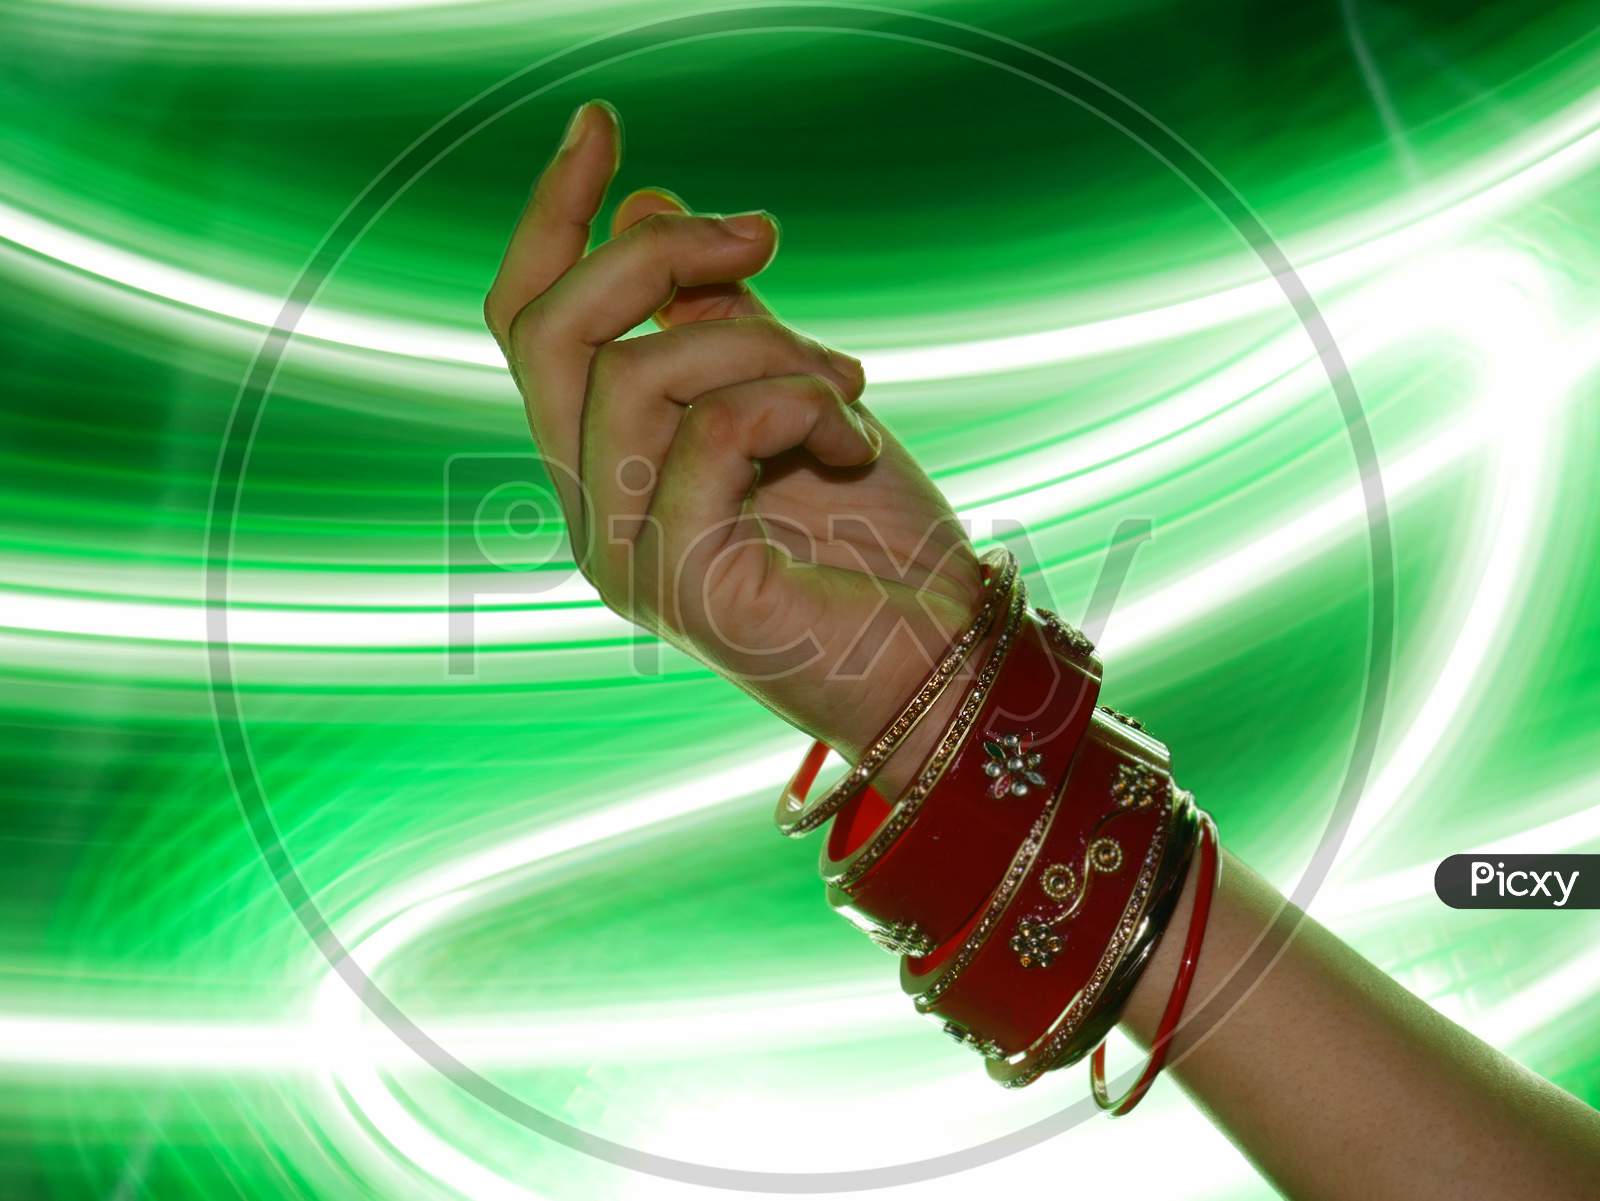 Indian Style Bangles Presented On Girl Hand With Light Effect Shine Backdrop, Commercial Fashion Product Presentation Image.